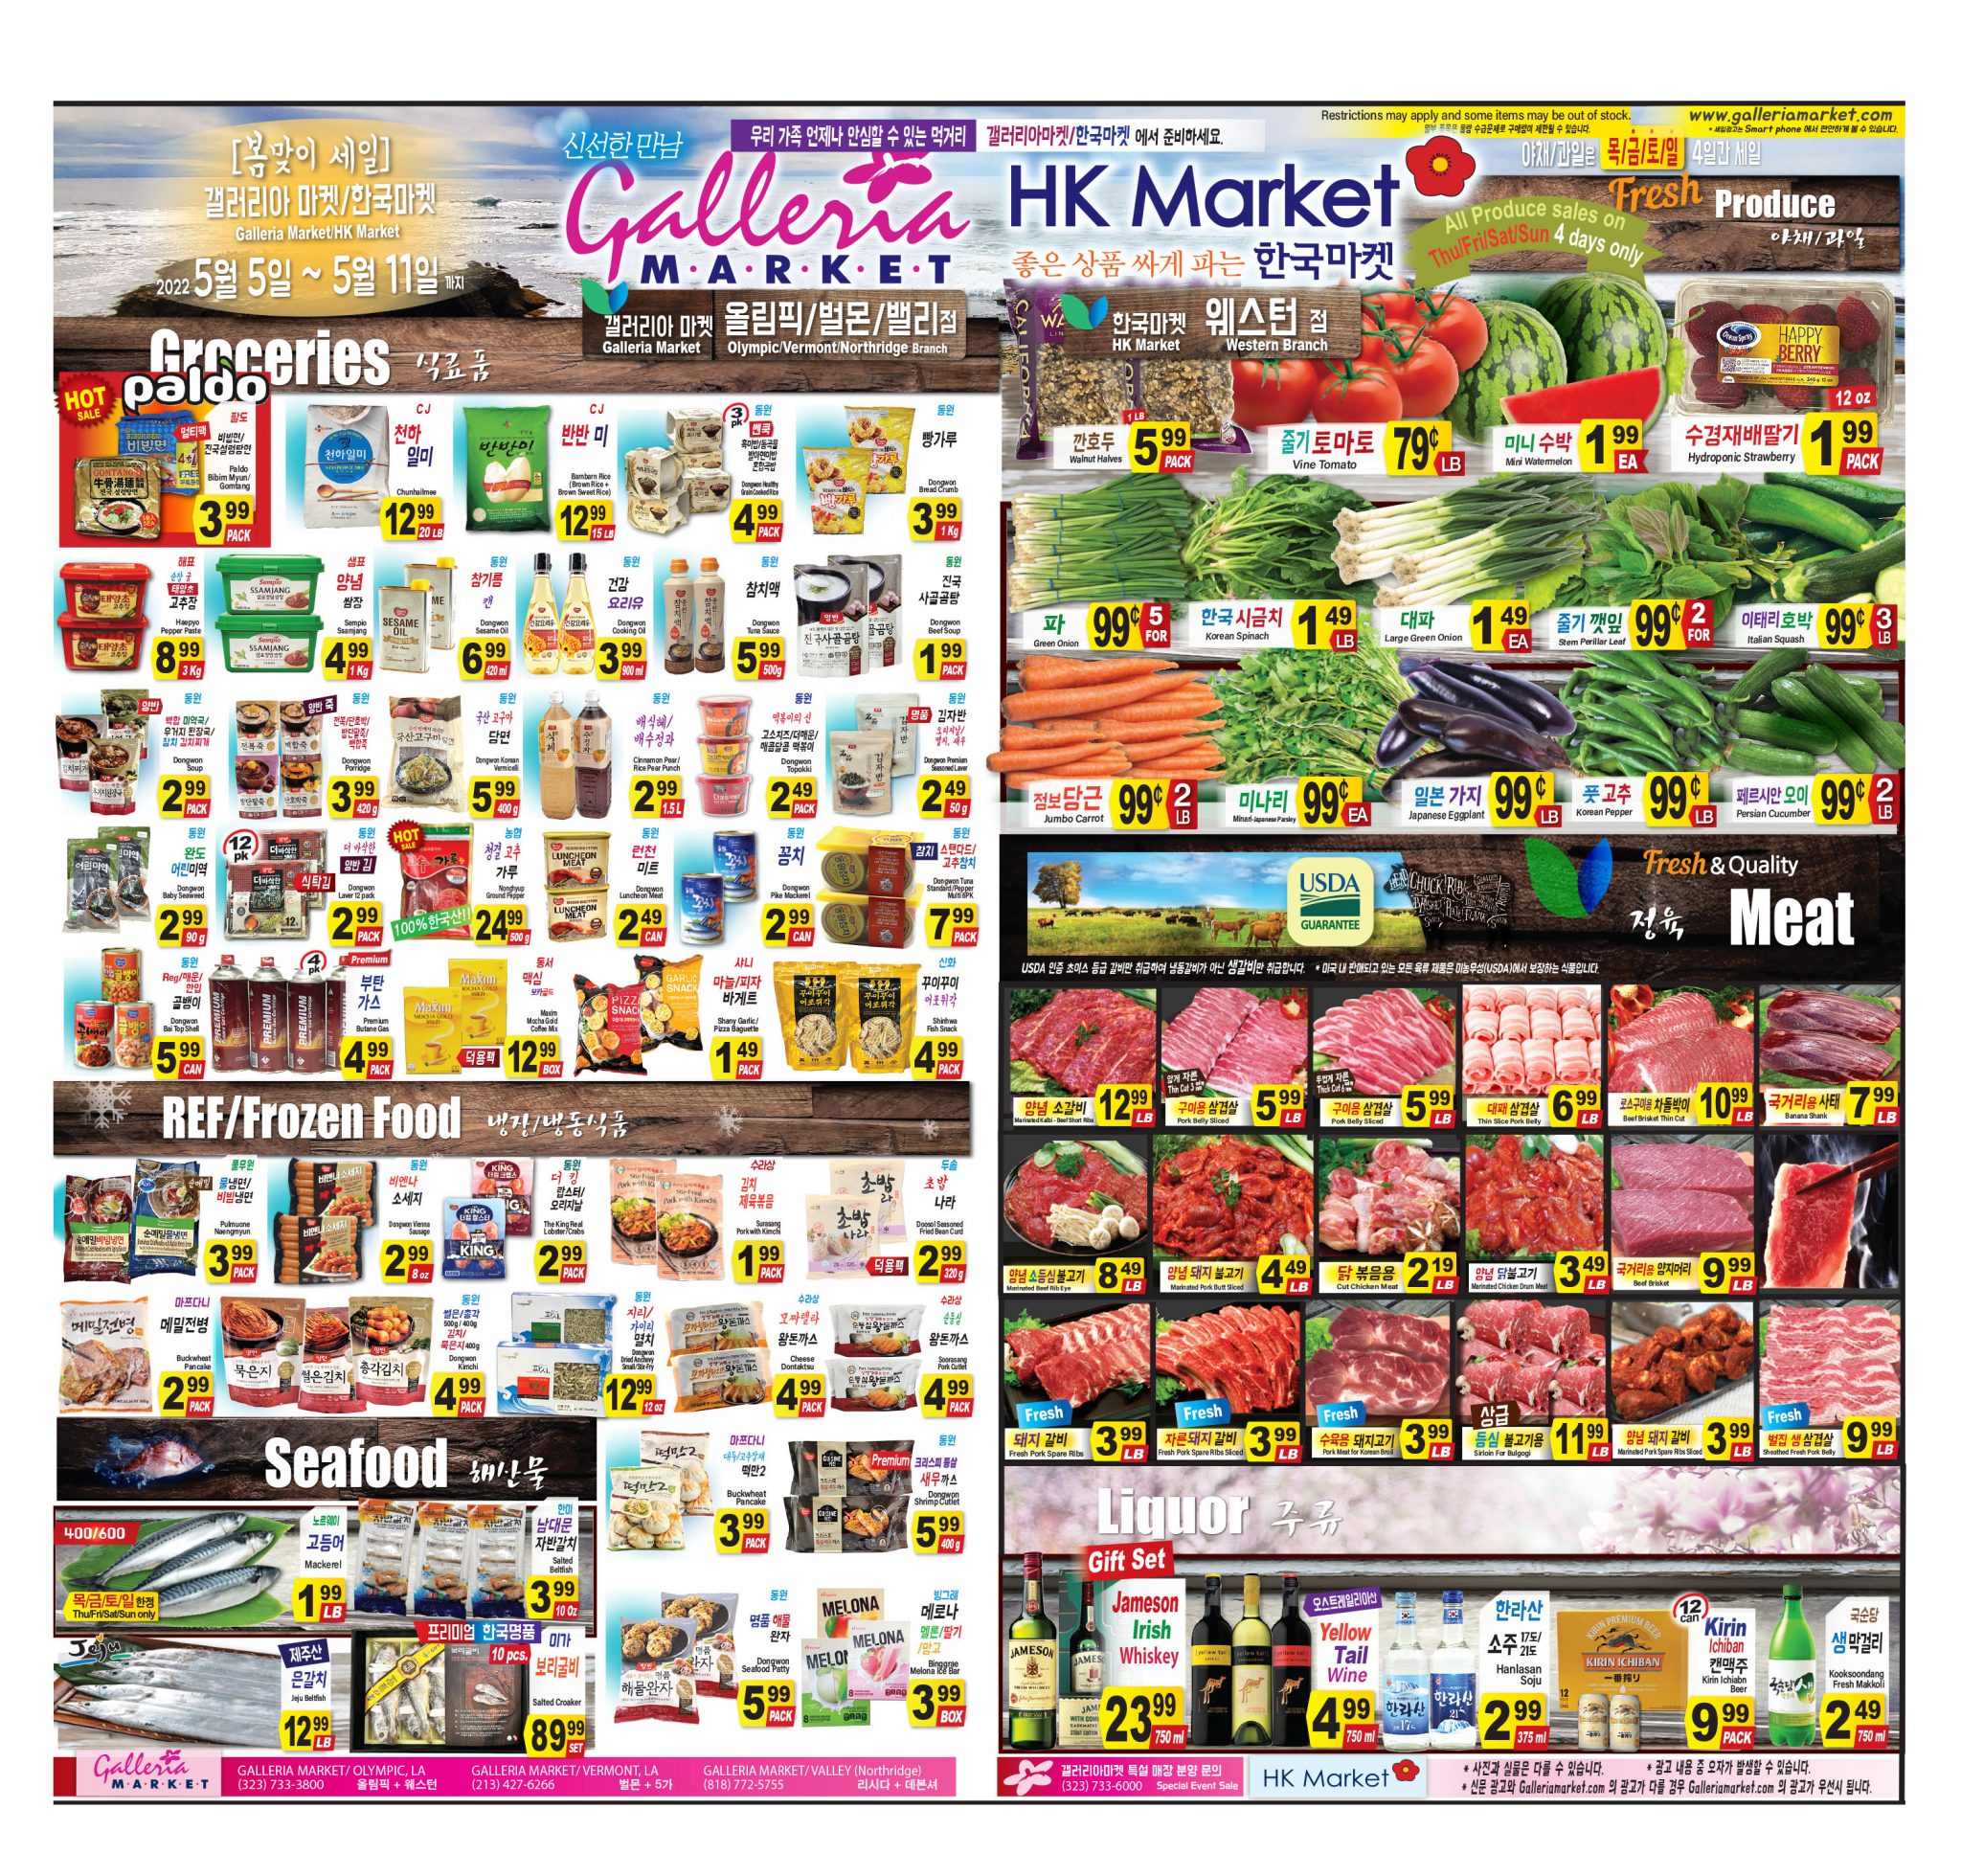 Market pages